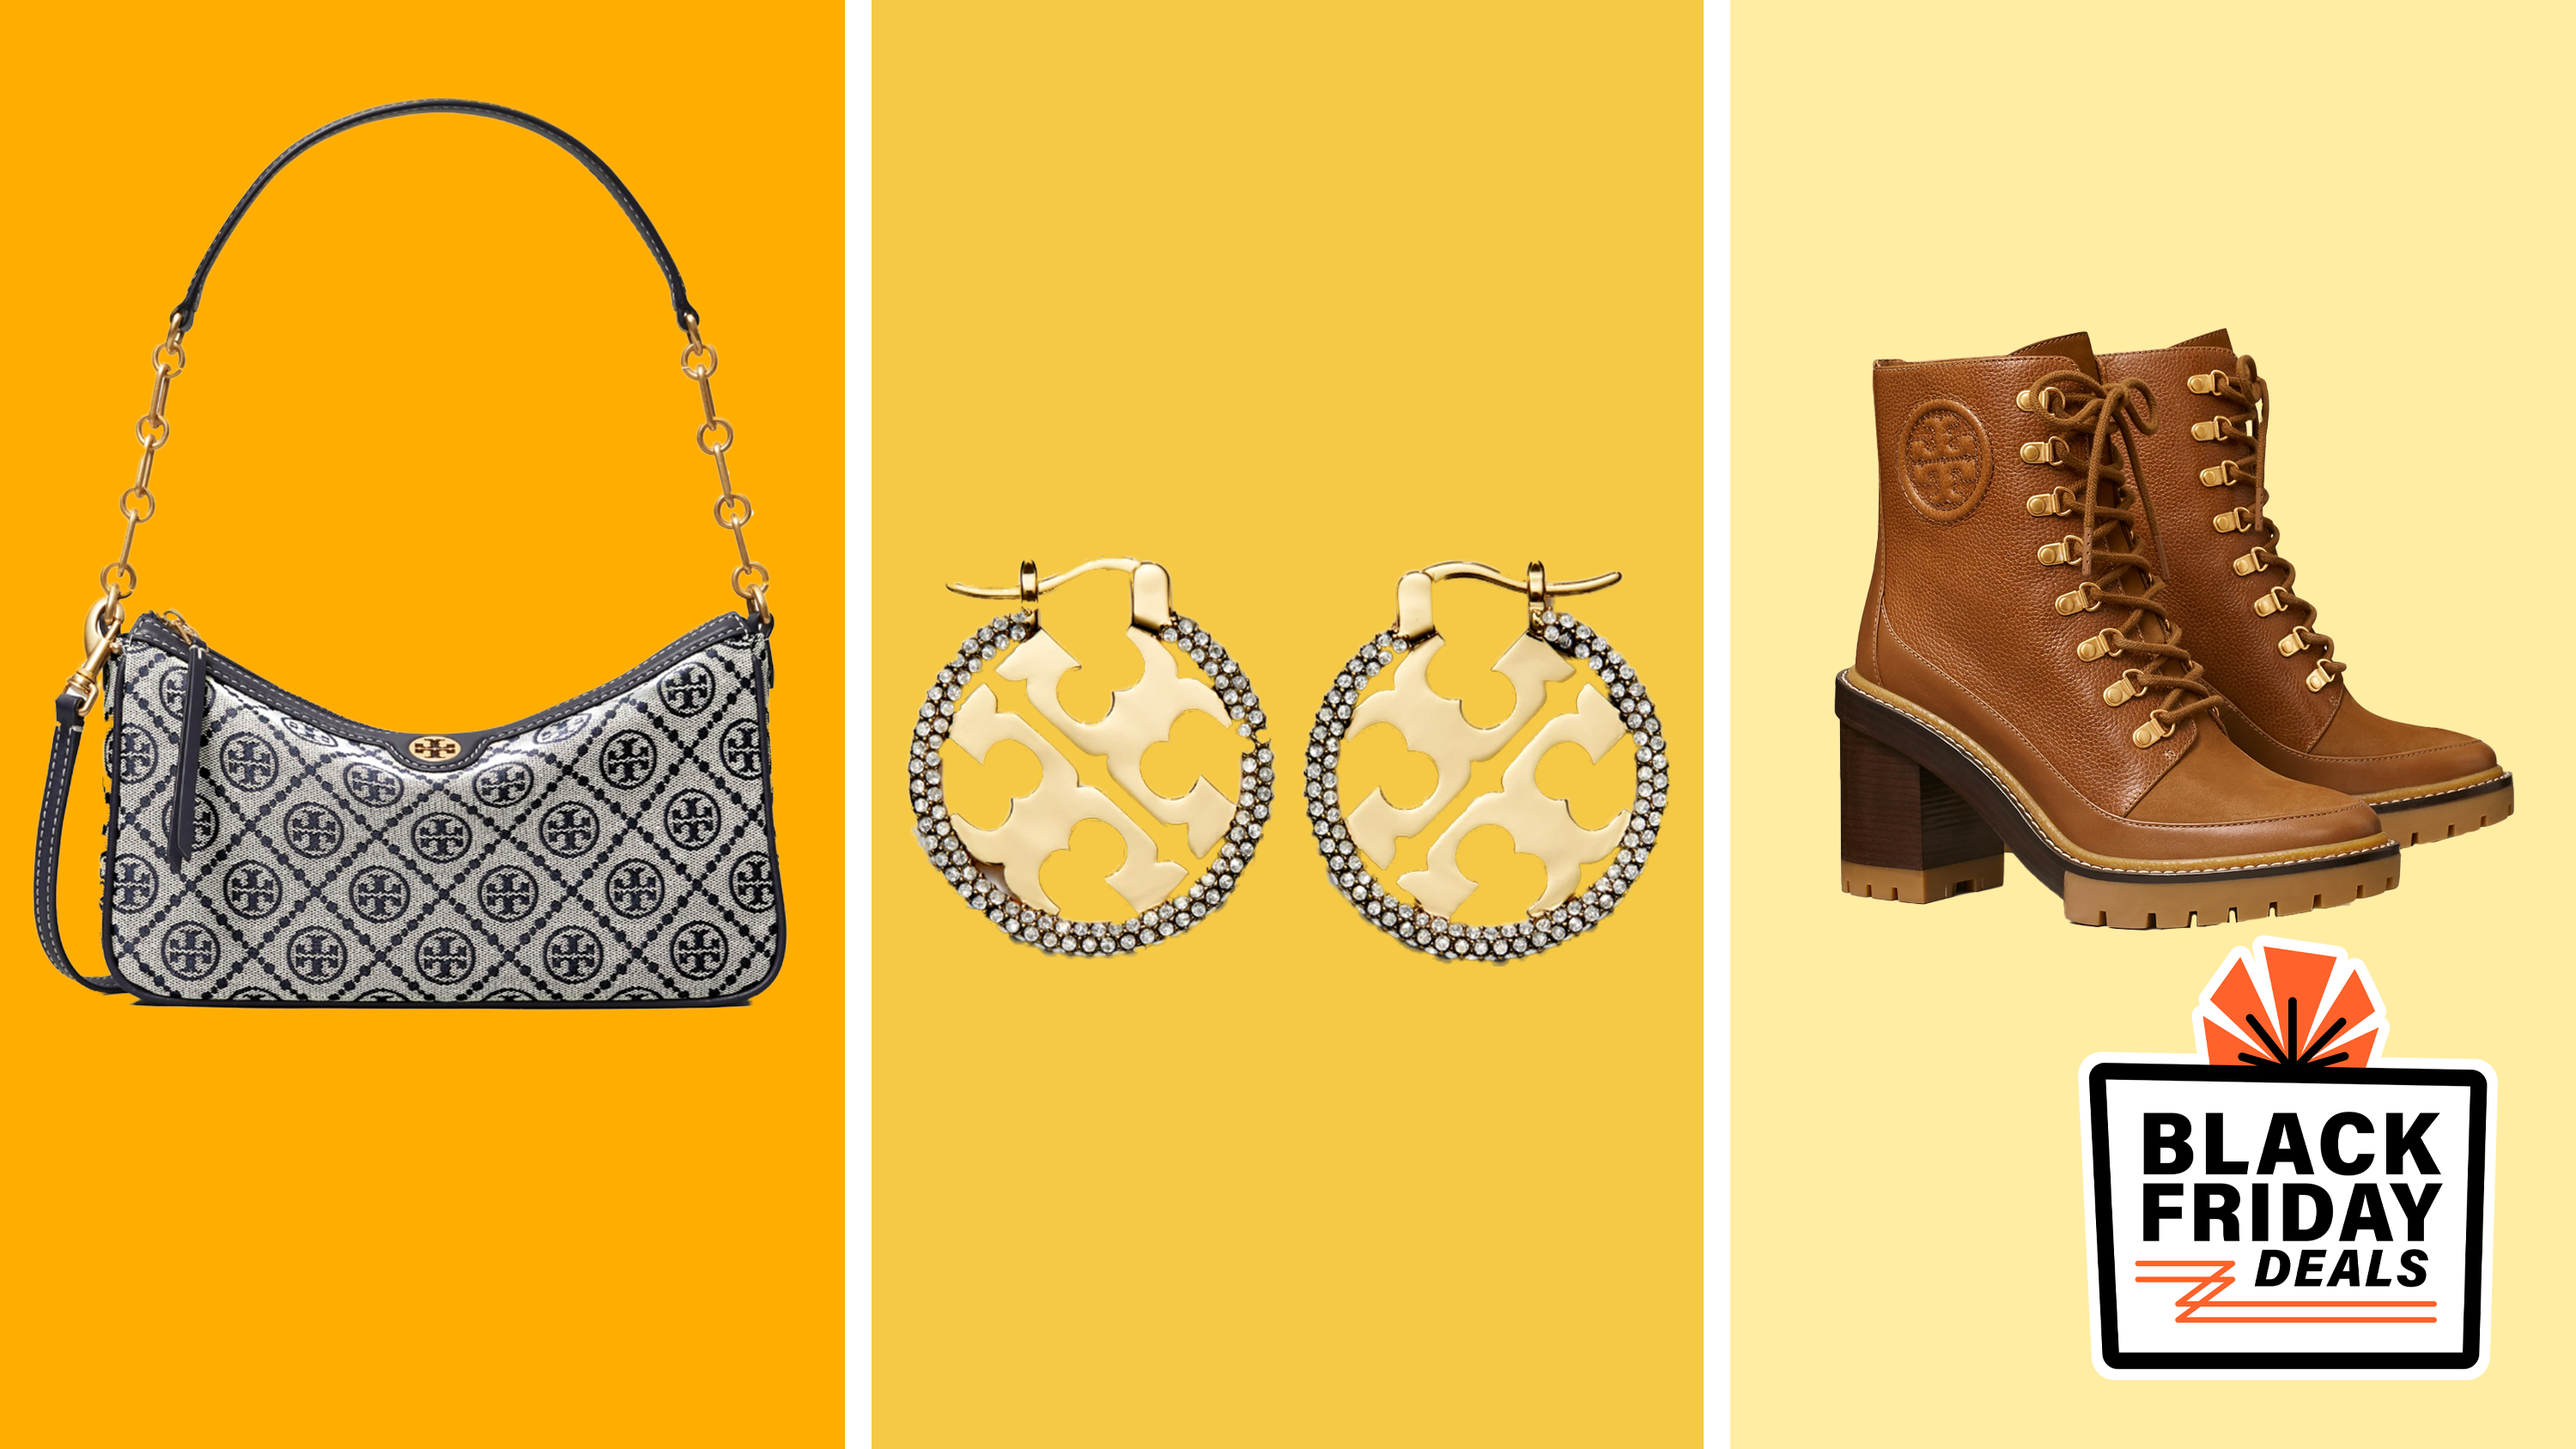 Black Friday 2022: Shop deals at Tory Burch's Holiday Event